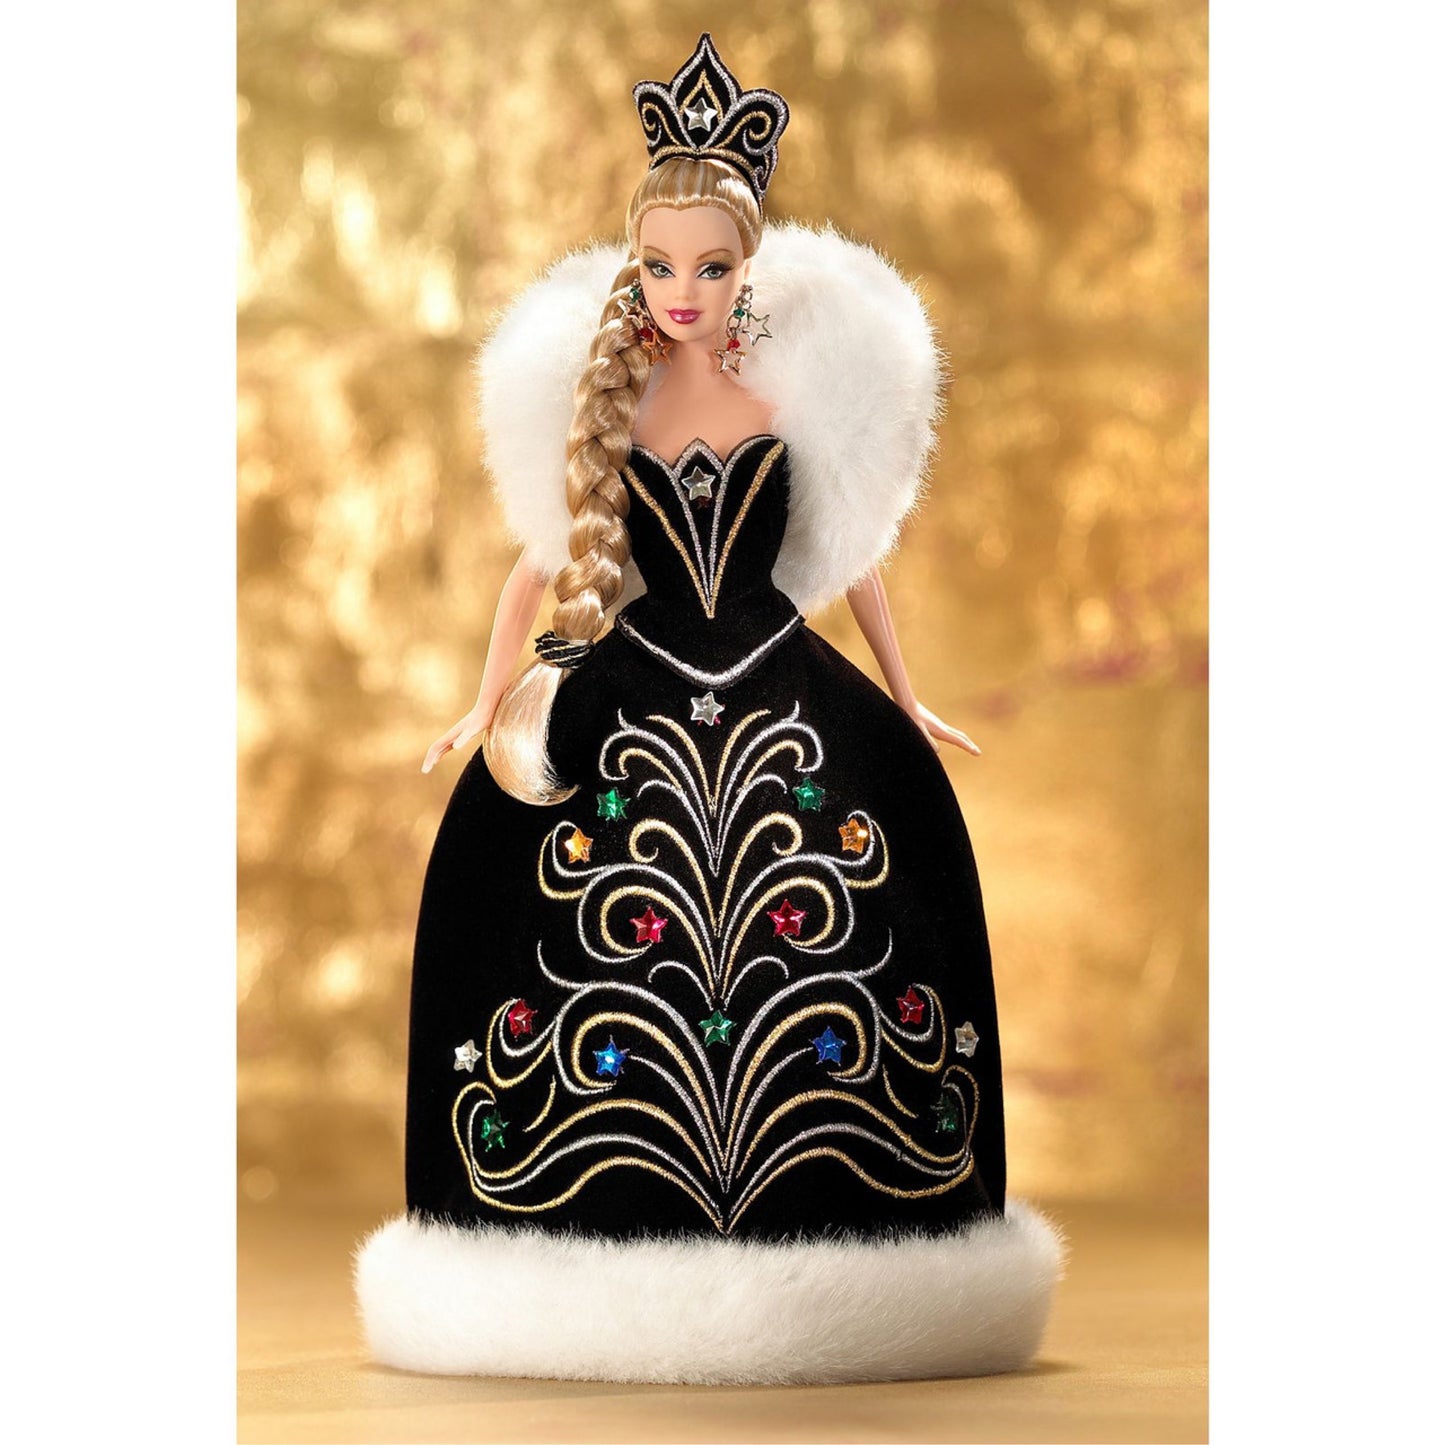 2006 Holiday Barbie Collector Doll by Bob Mackie